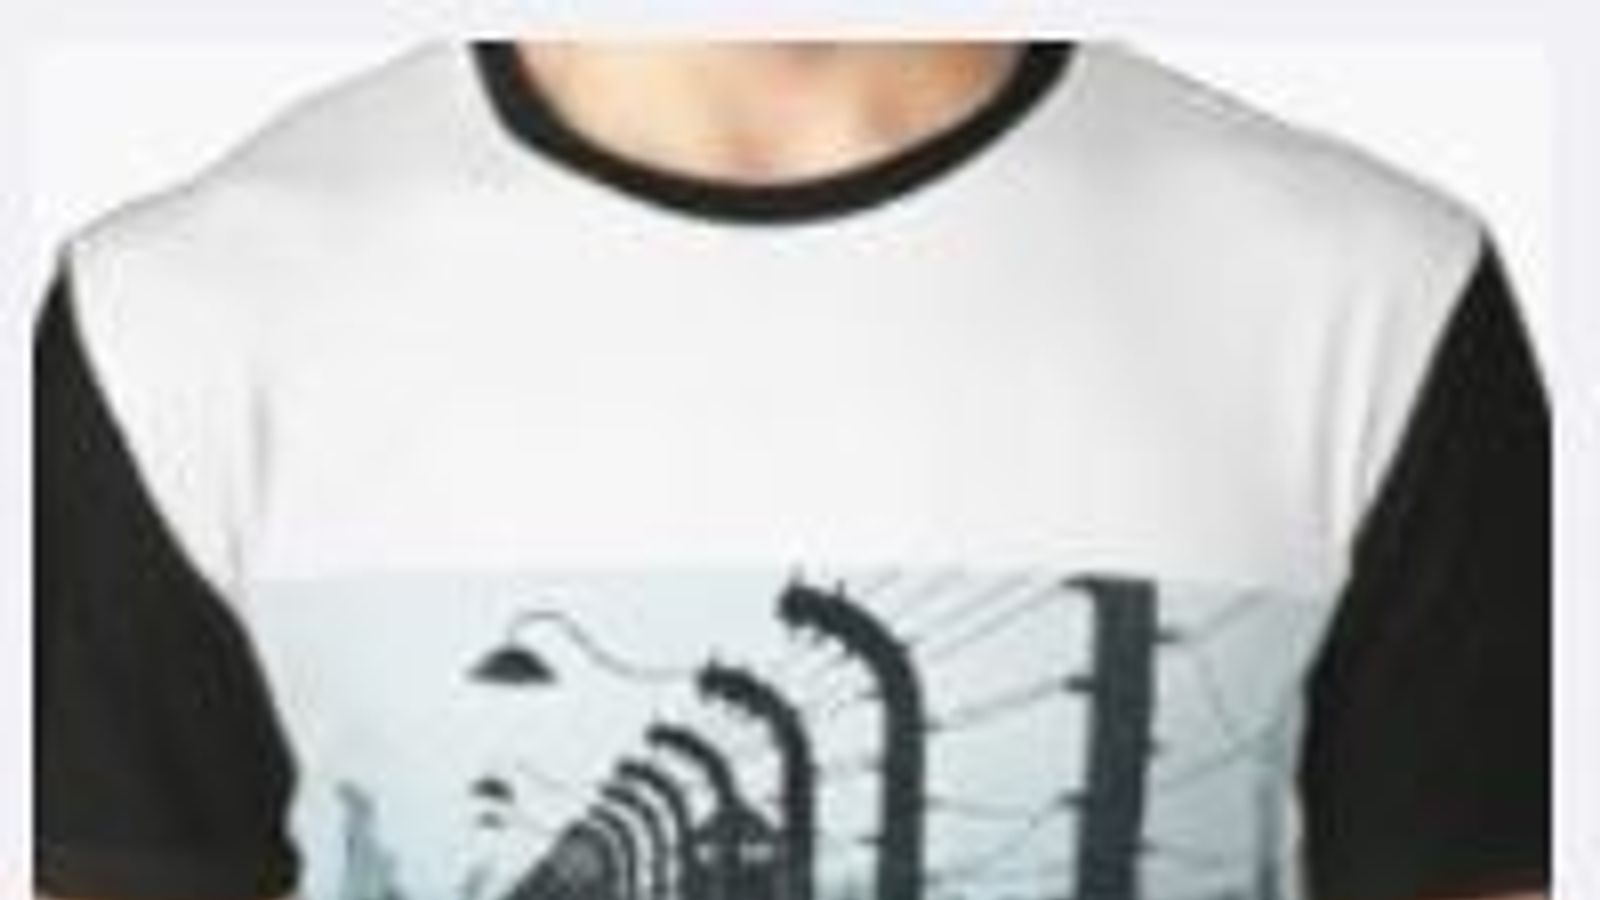 Online retailer Redbubble criticised over Auschwitz-themed pillows and ...